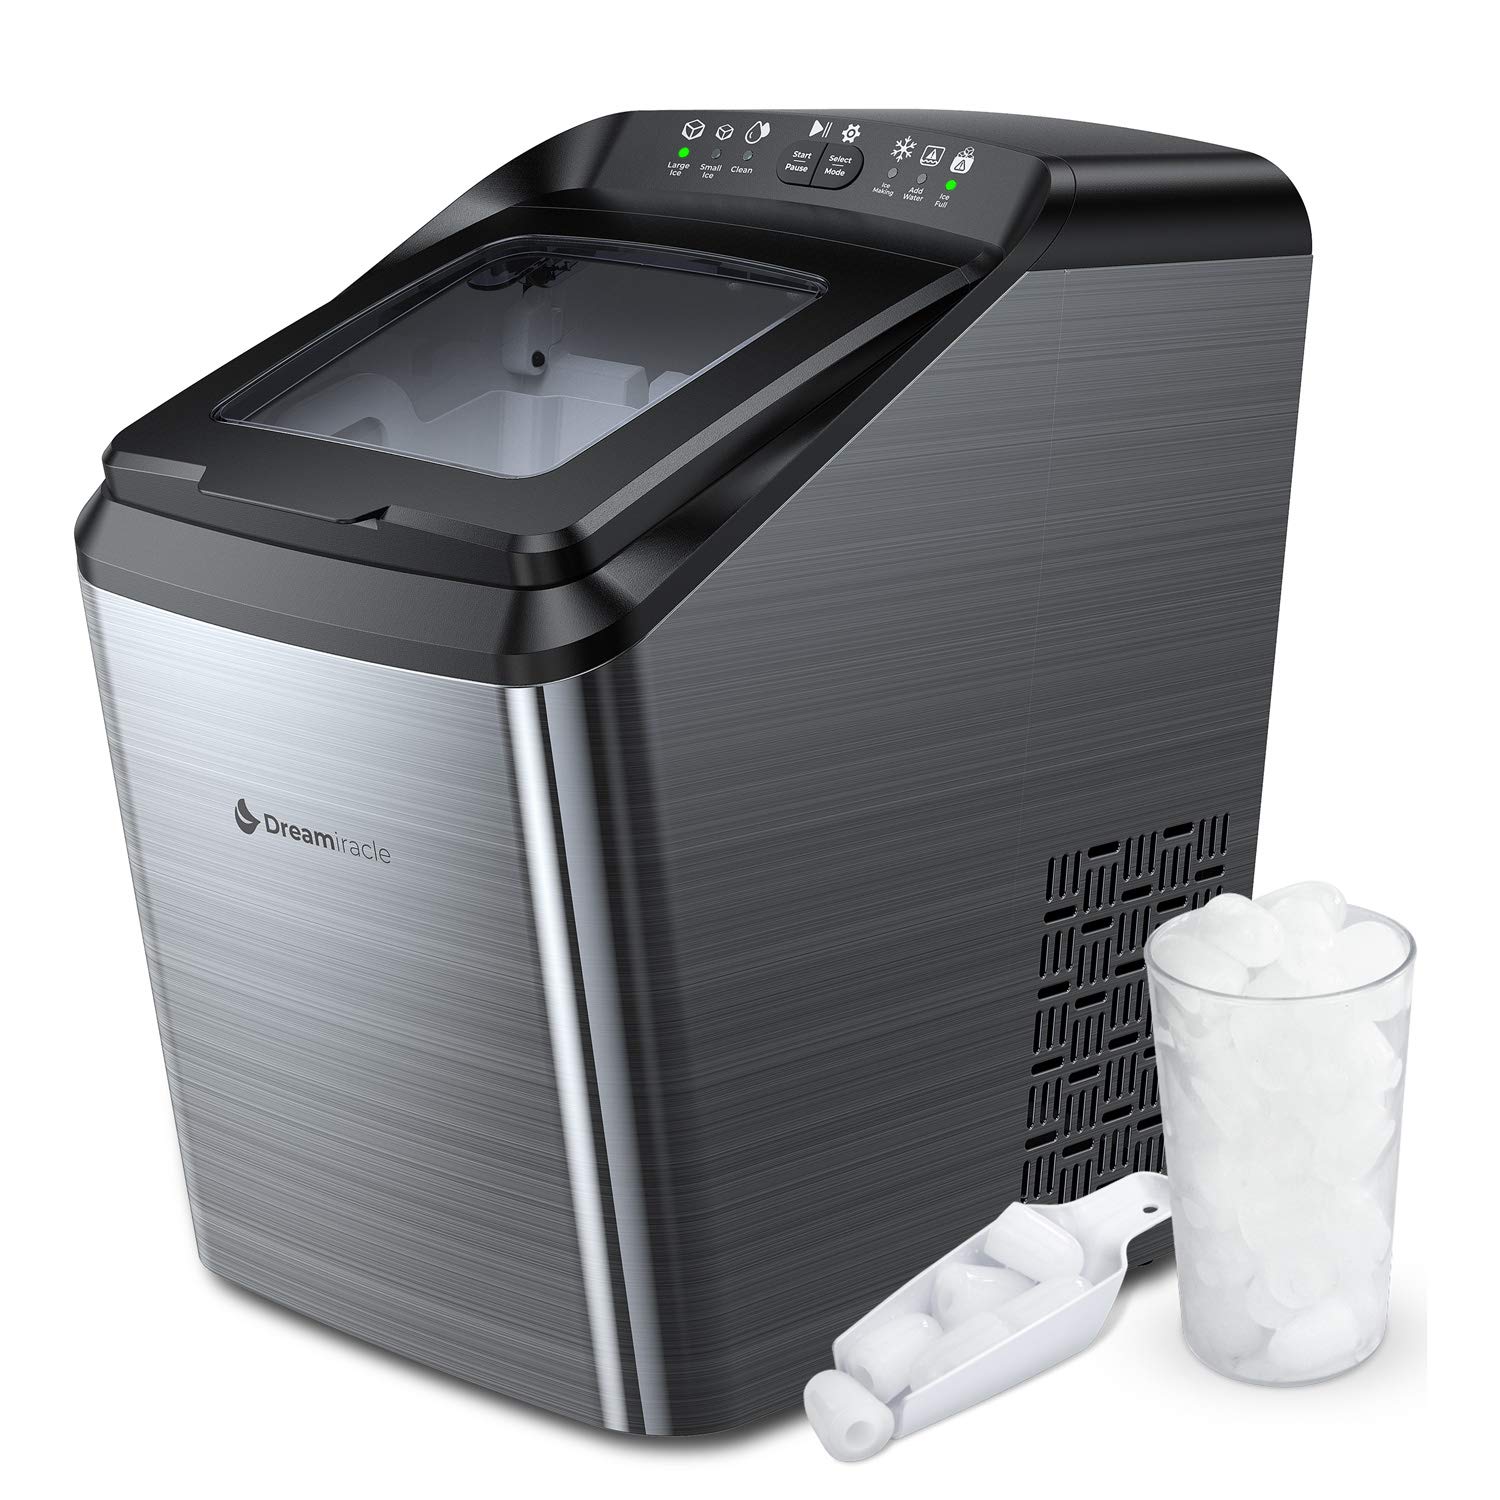 Dreamiracle Self Cleaning Countertop Ice Maker Machines: 2.8L $136, 2.2L $120, 1.5L $86 + Free Shipping w/ Prime